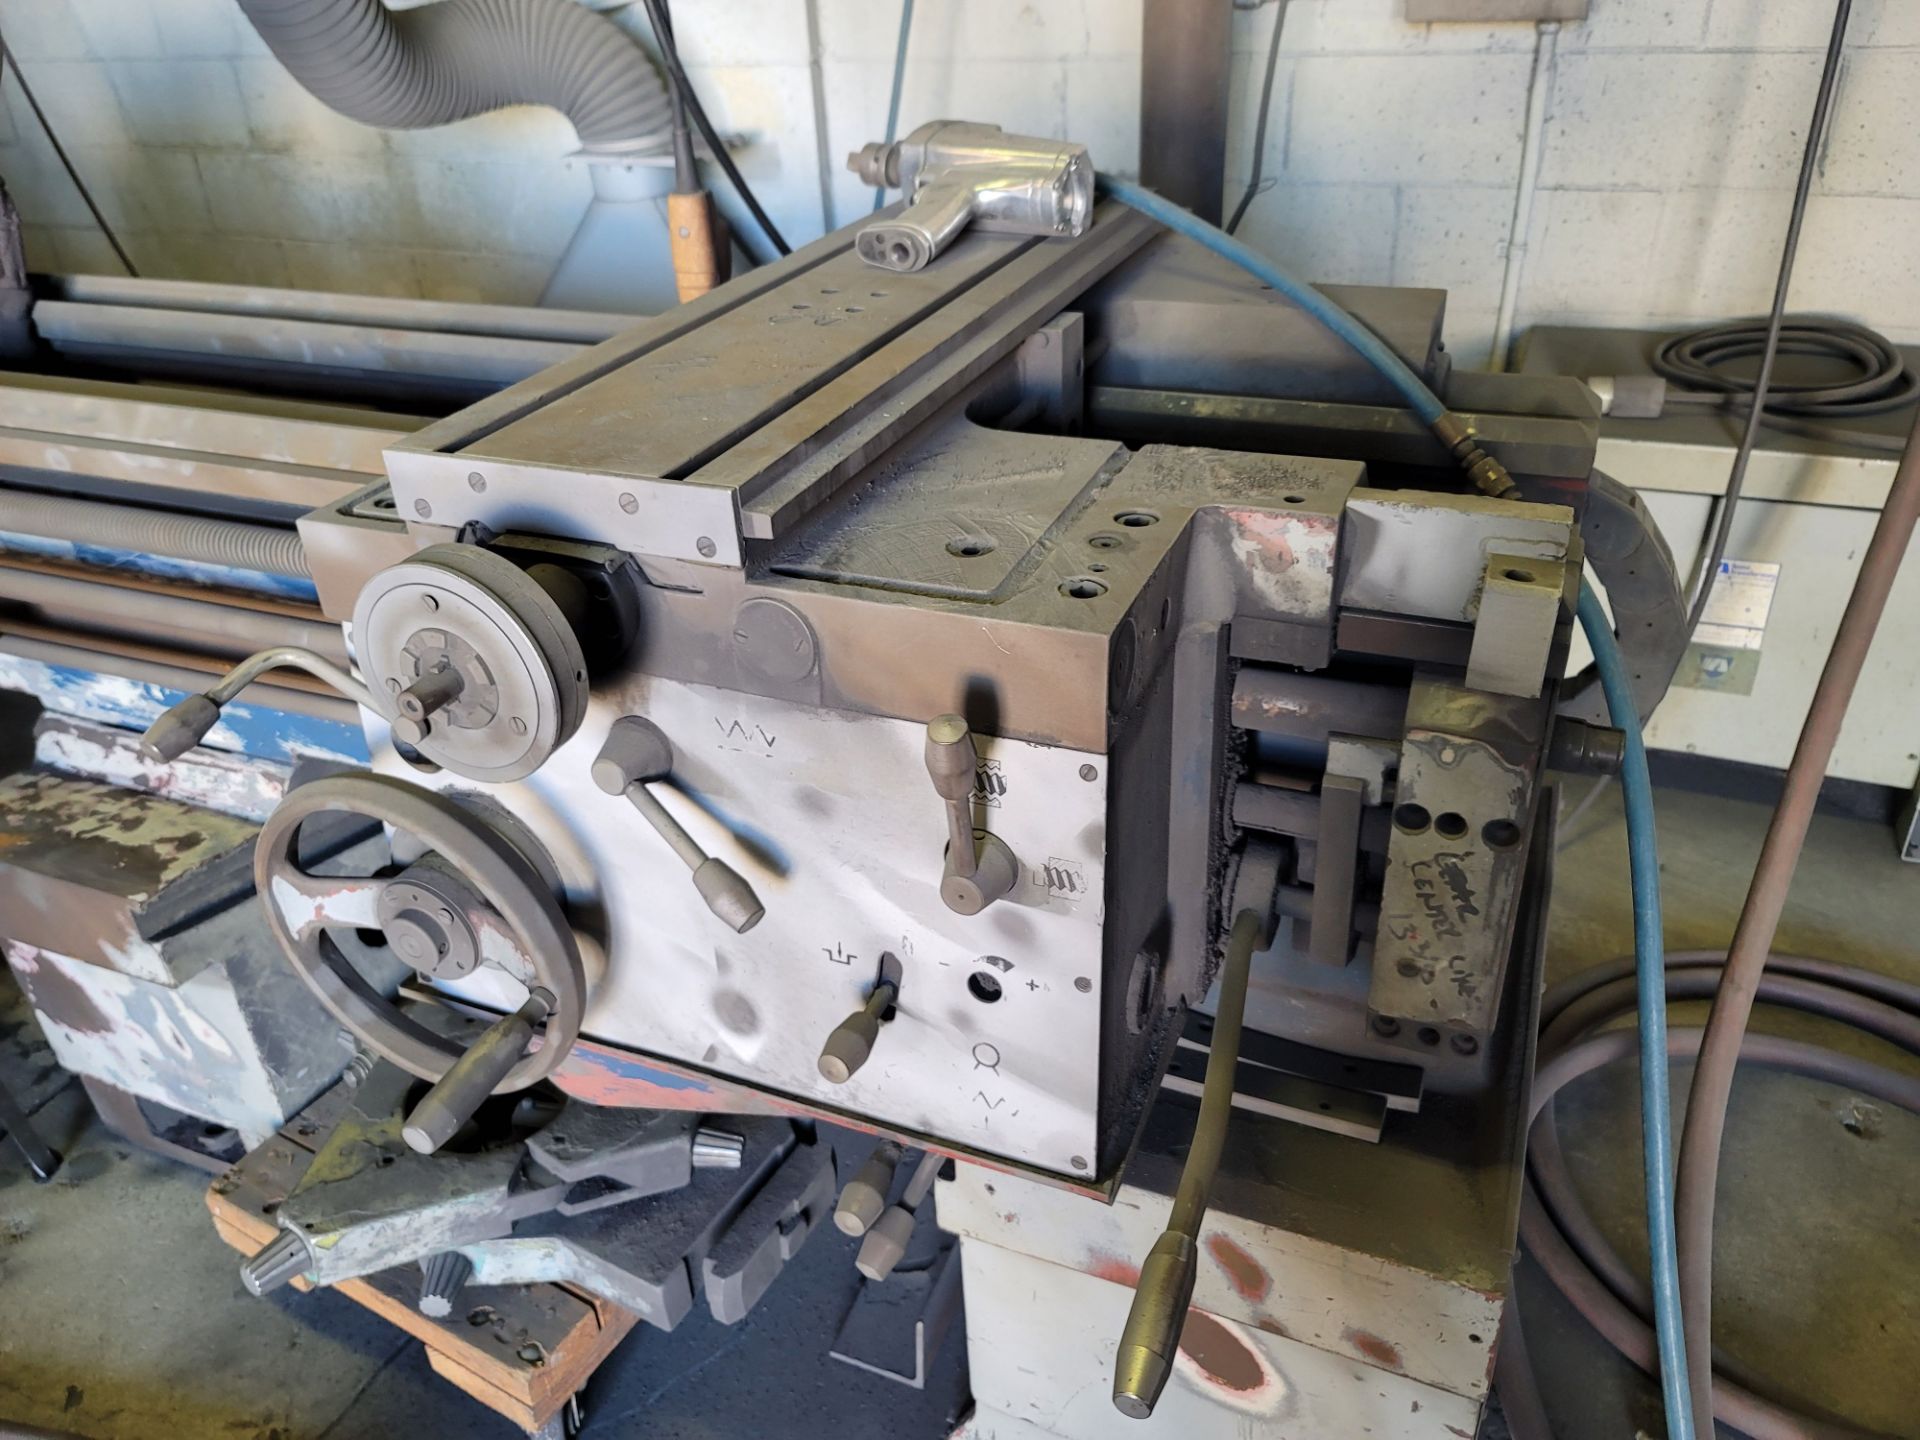 PONAR TUR63 LATHE, 12" 3-JAW CHUCK, TAILSTOCK, (2) STEADY RESTS - Image 4 of 7